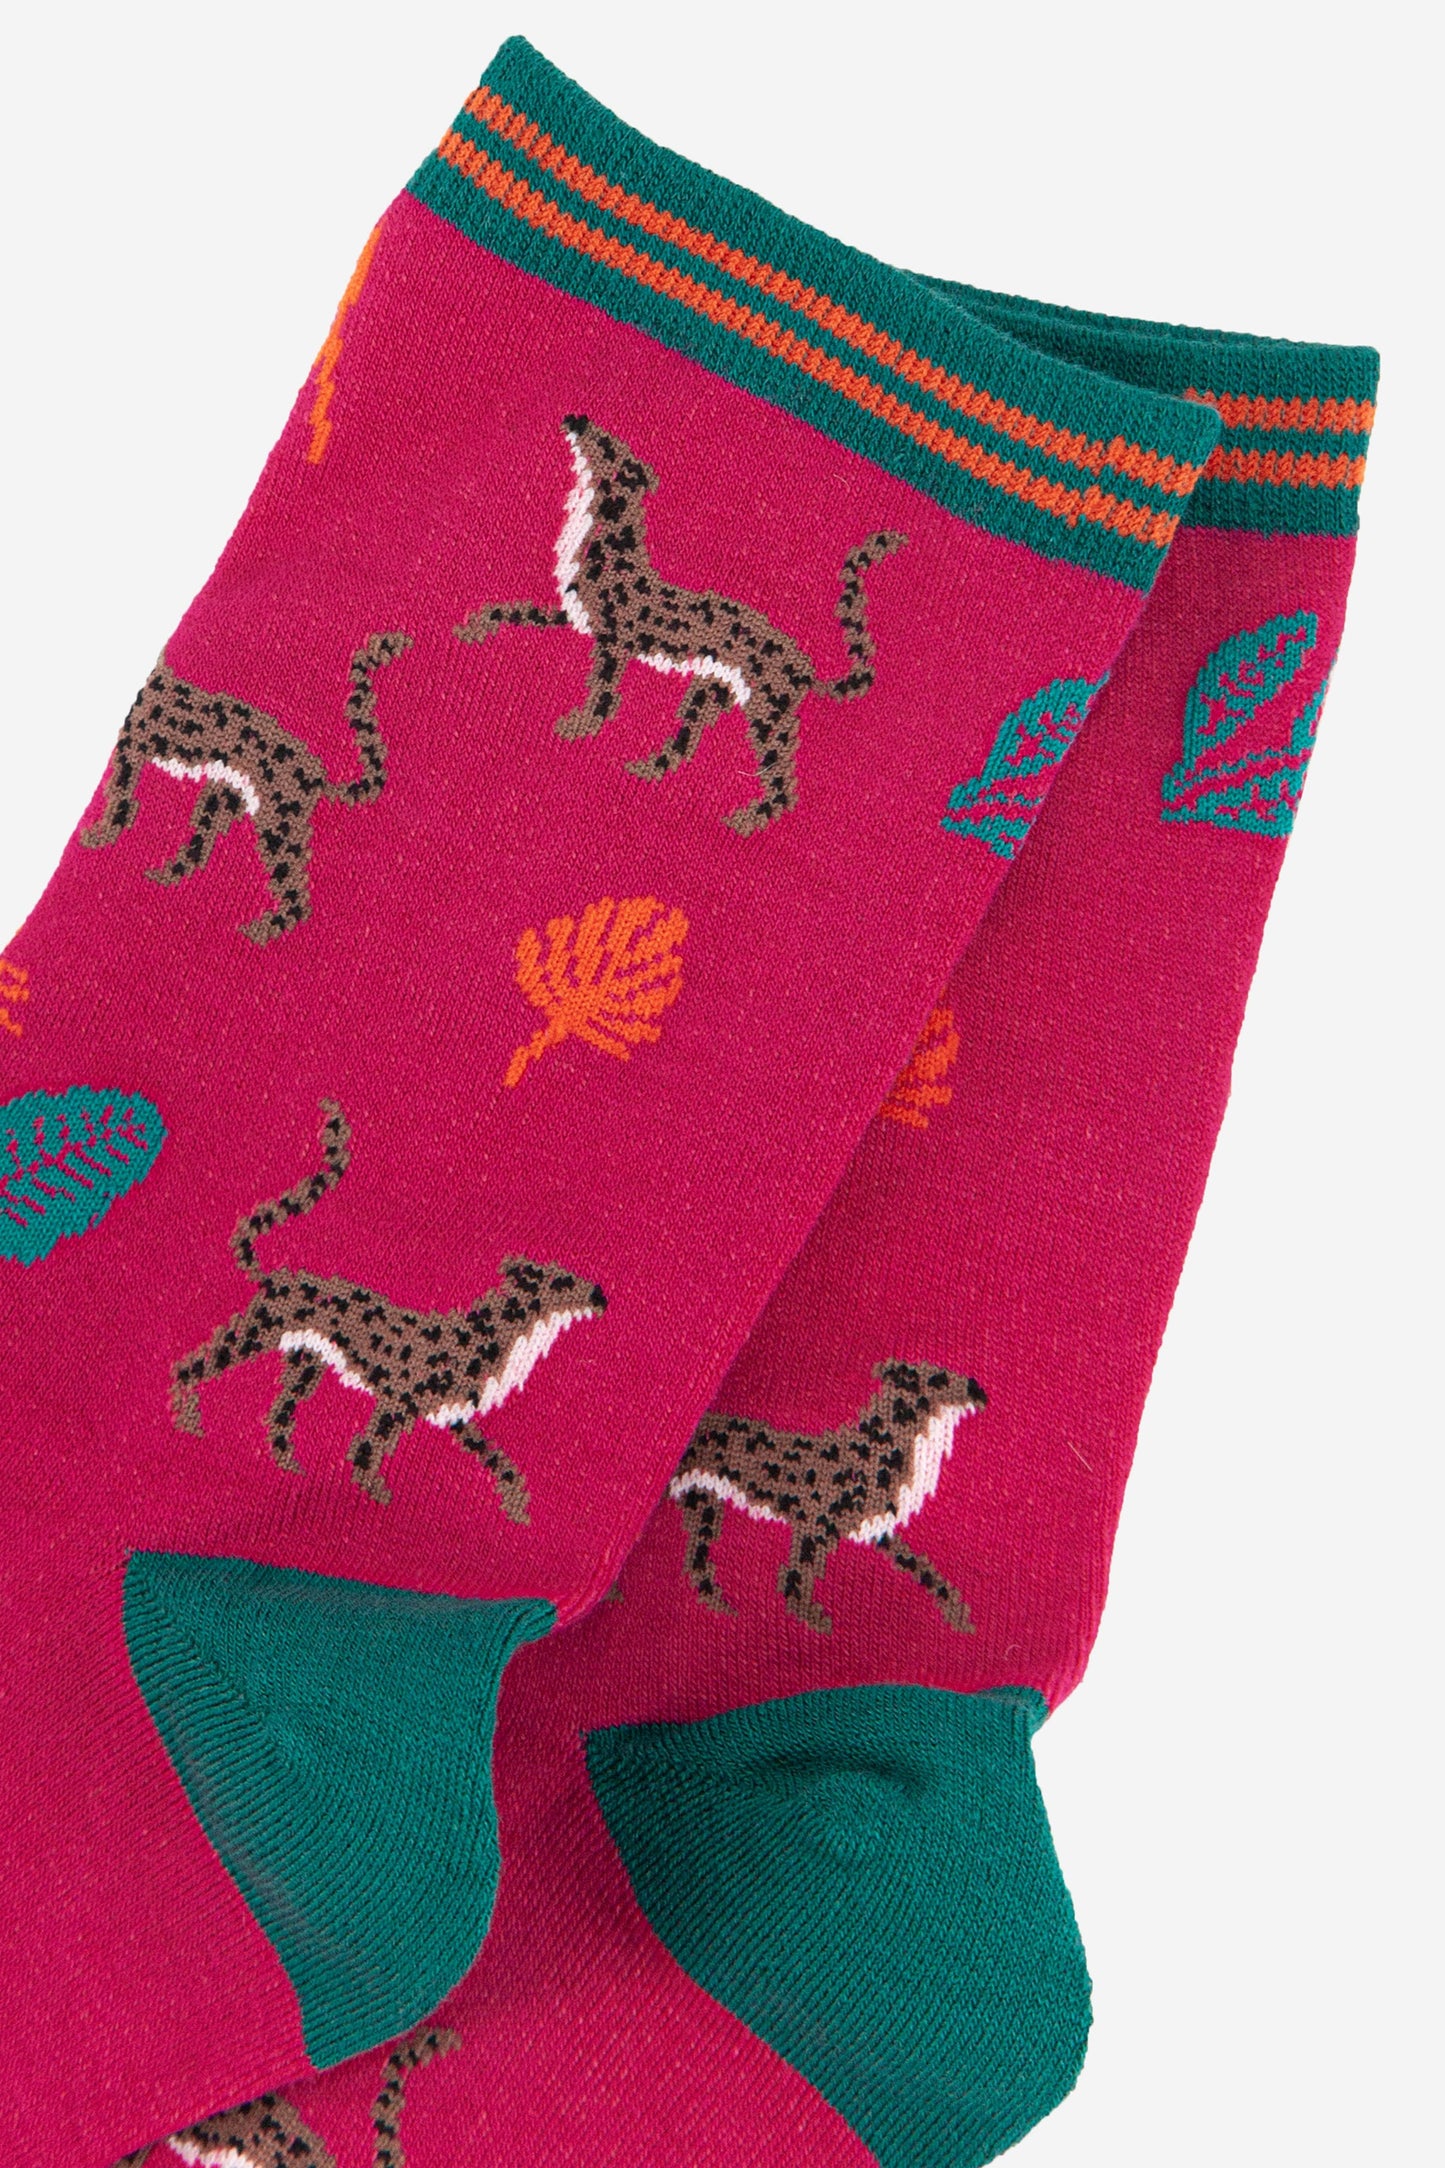 close up of the cheetah cat pattern on the pink ankle socks